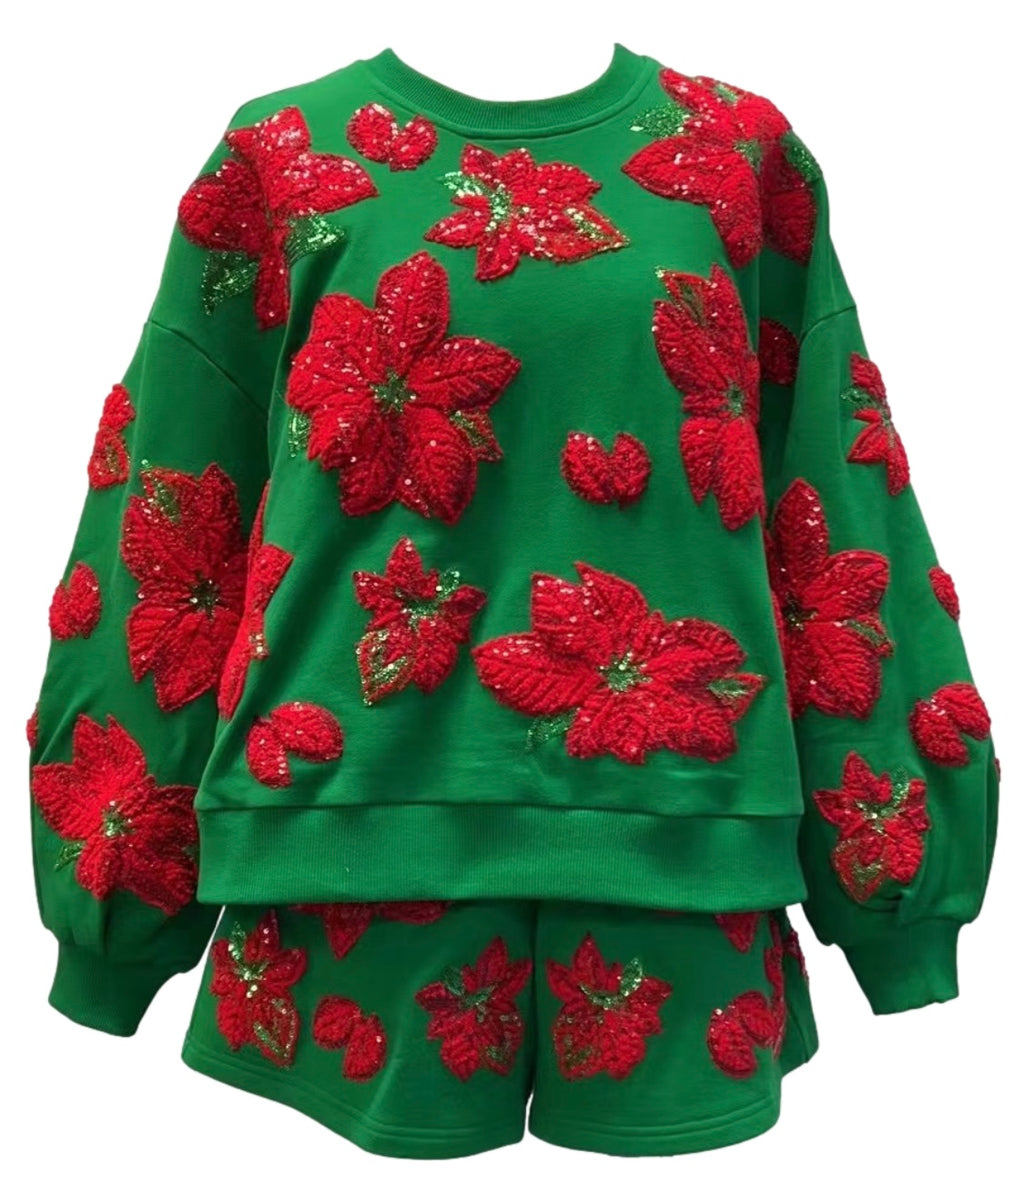 Queen of Sparkles Green and Red Poinsettia Sweatshirt